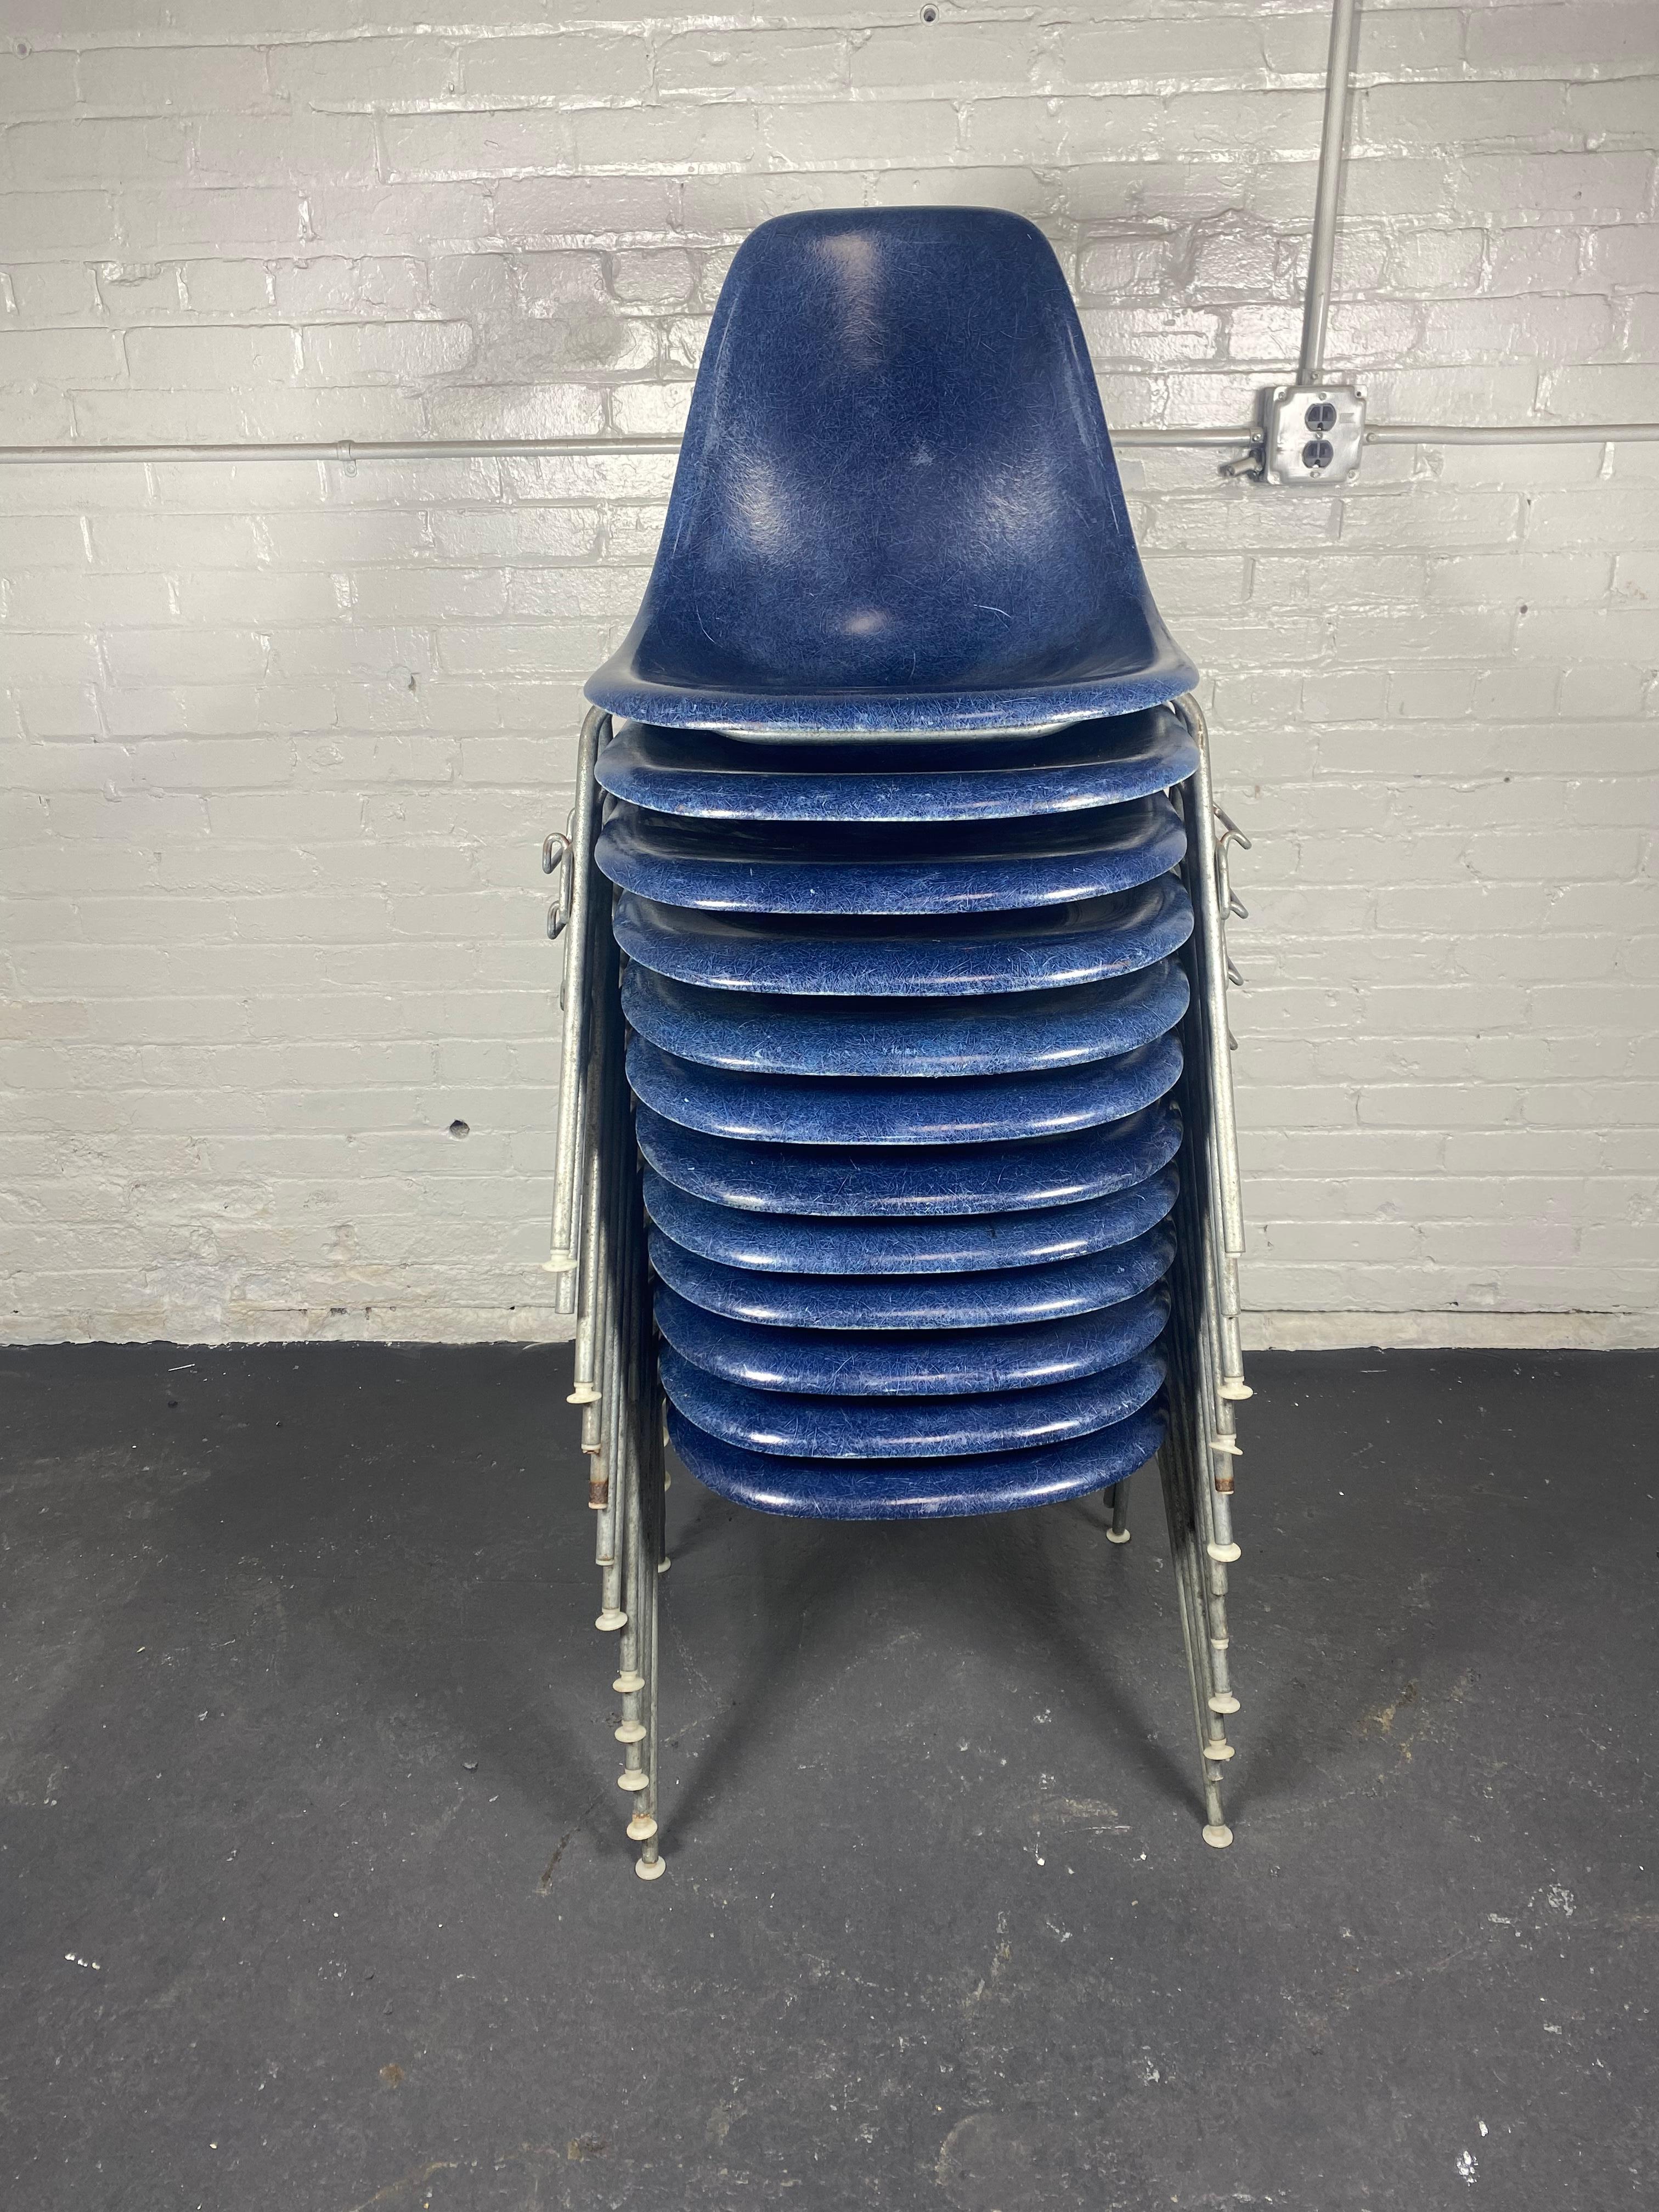 Metal 12 DSS Stacking Chairs Charles & Ray Eames Herman Miller, Blue Fiberglass, 1960s For Sale